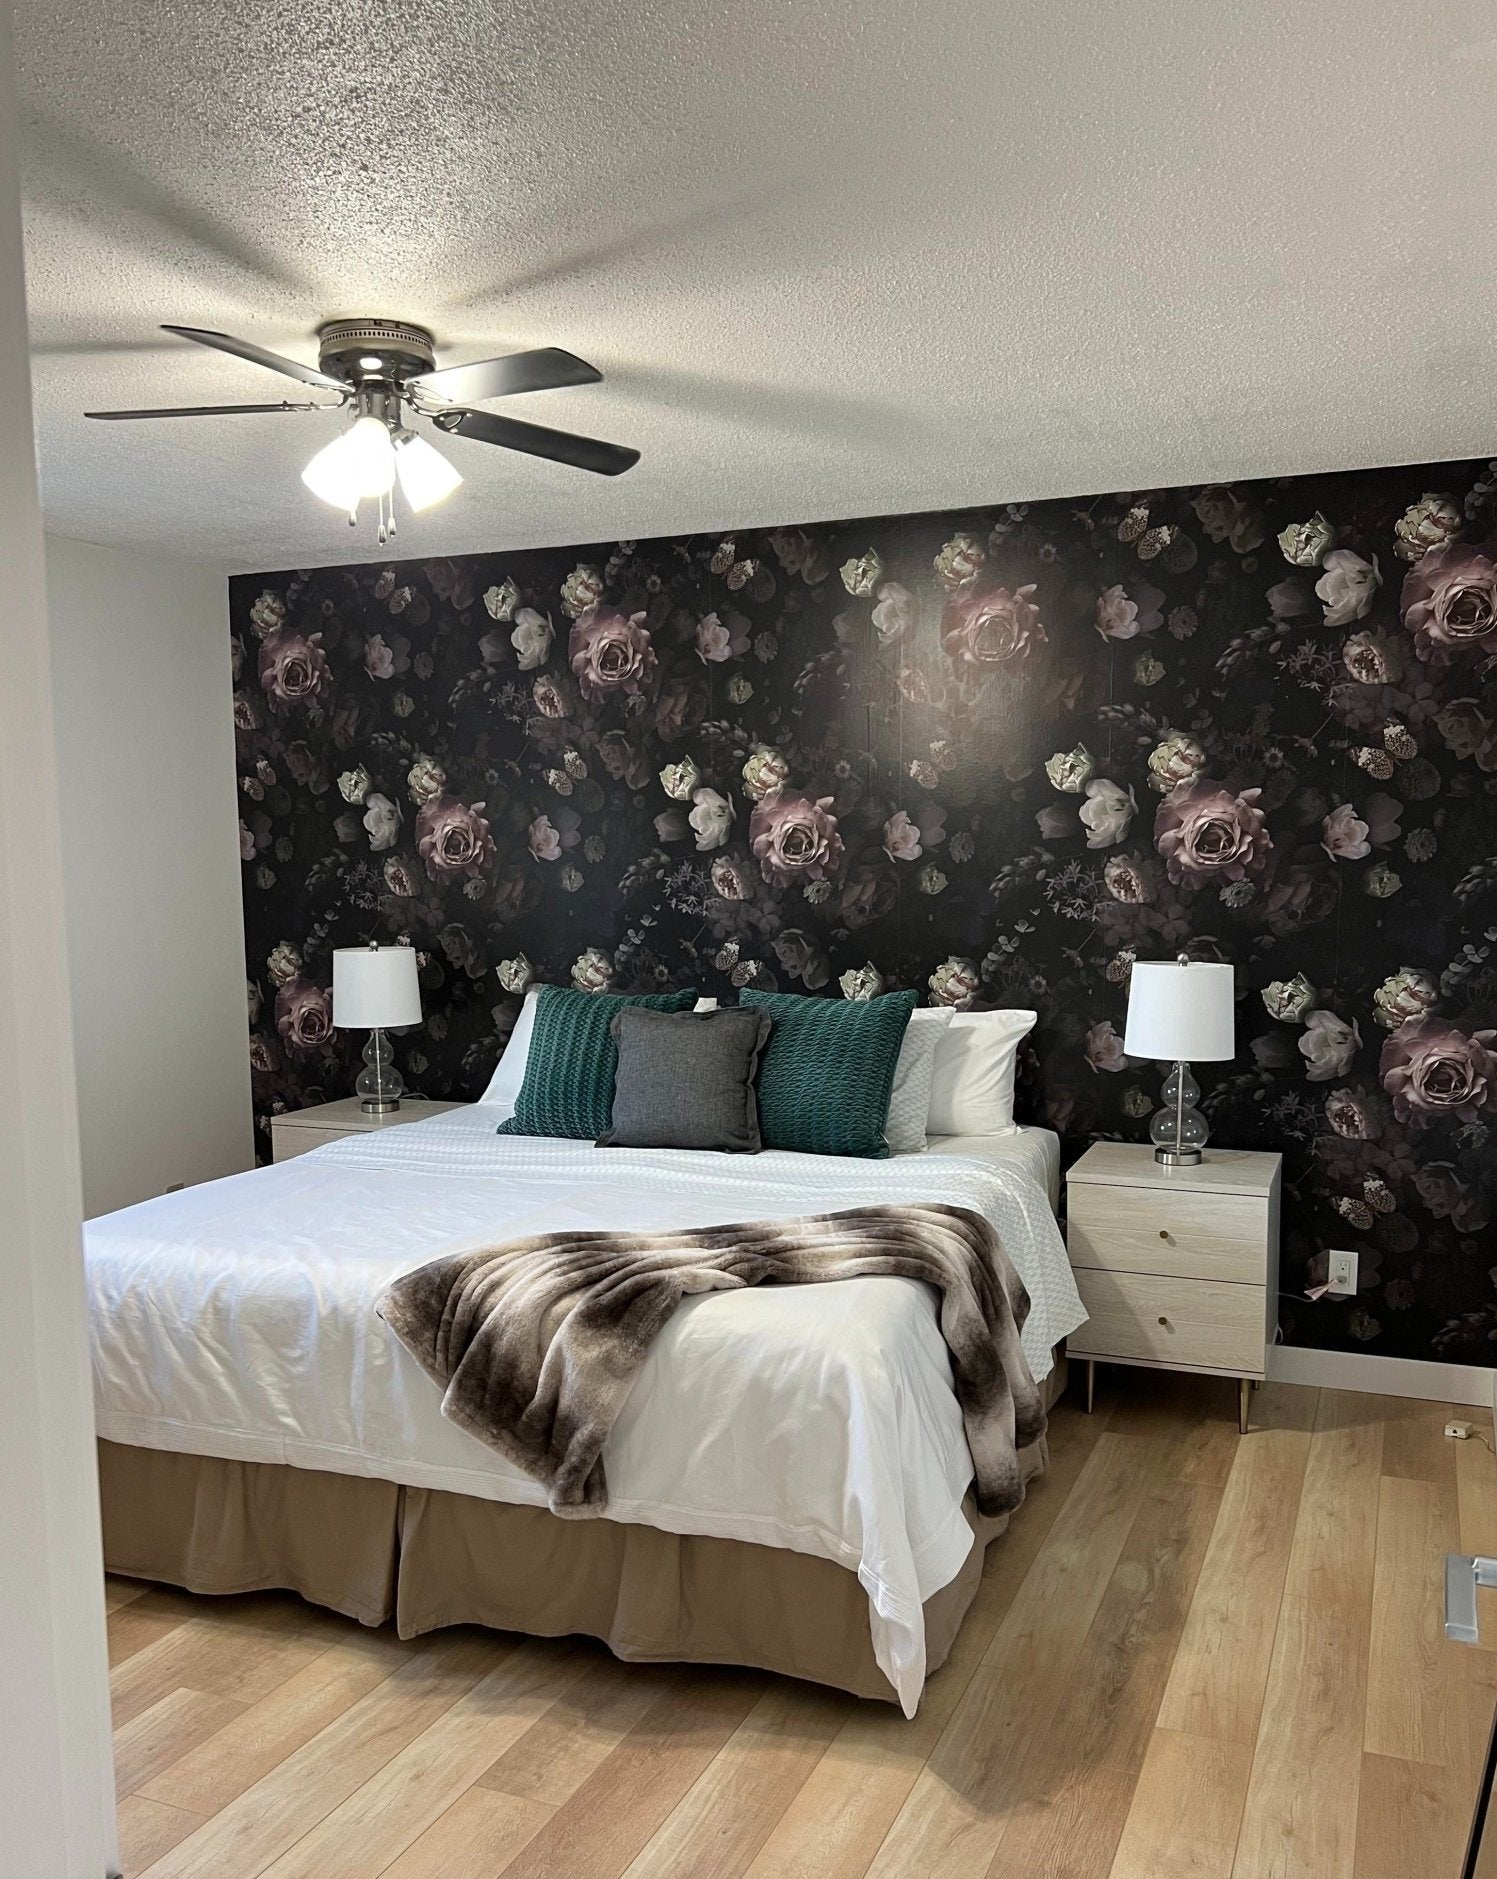 Moody Dark Floral wallpaper in a room with ceiling fan, white bedding, and light wood flooring